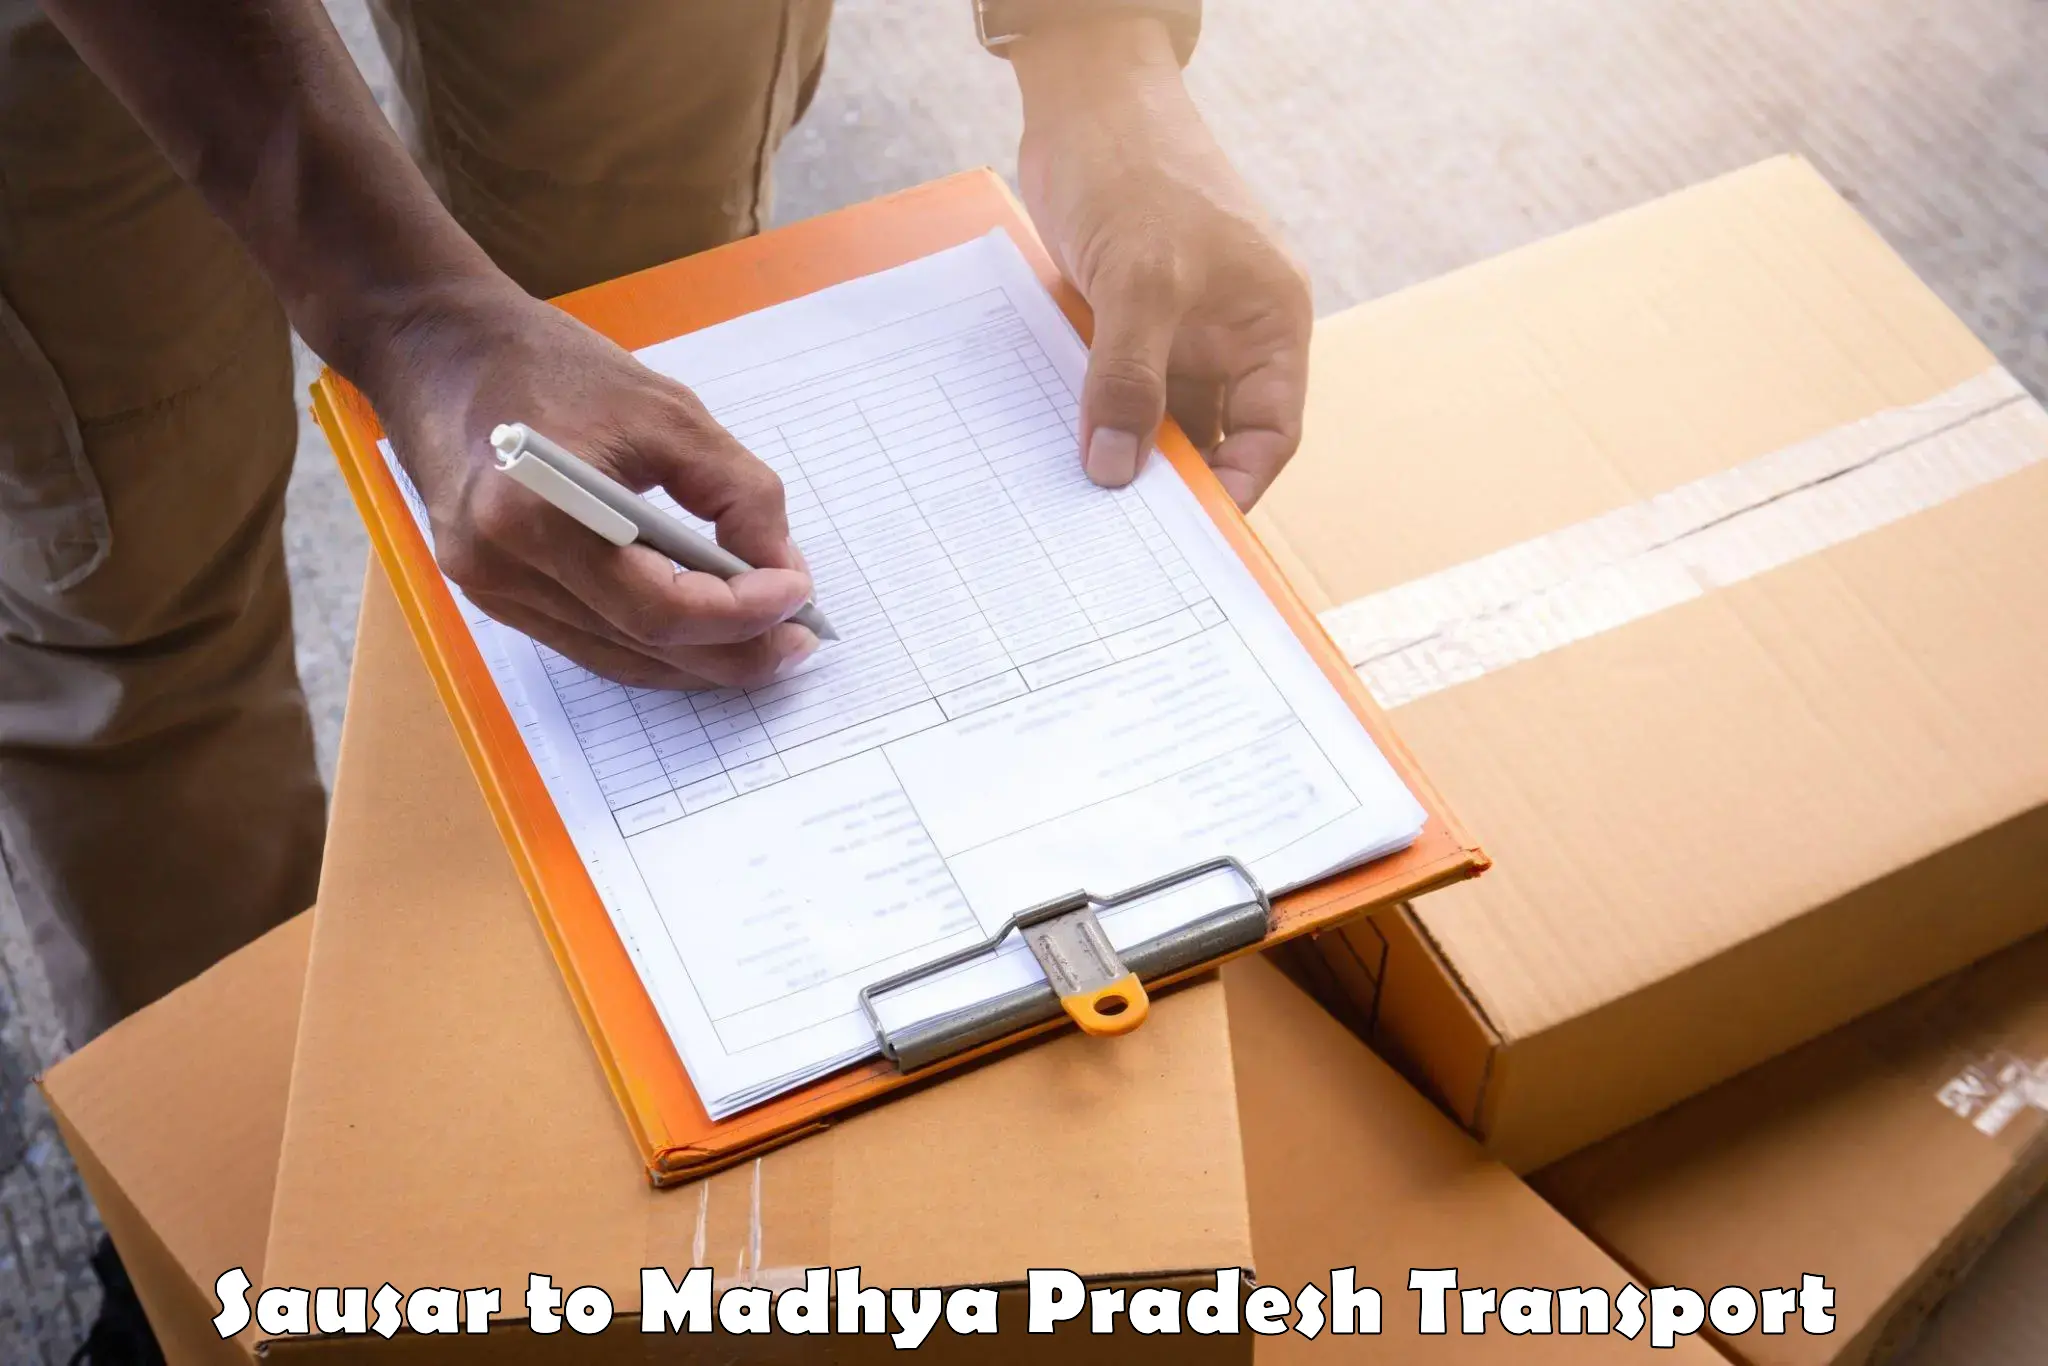 Domestic goods transportation services Sausar to IIIT Bhopal